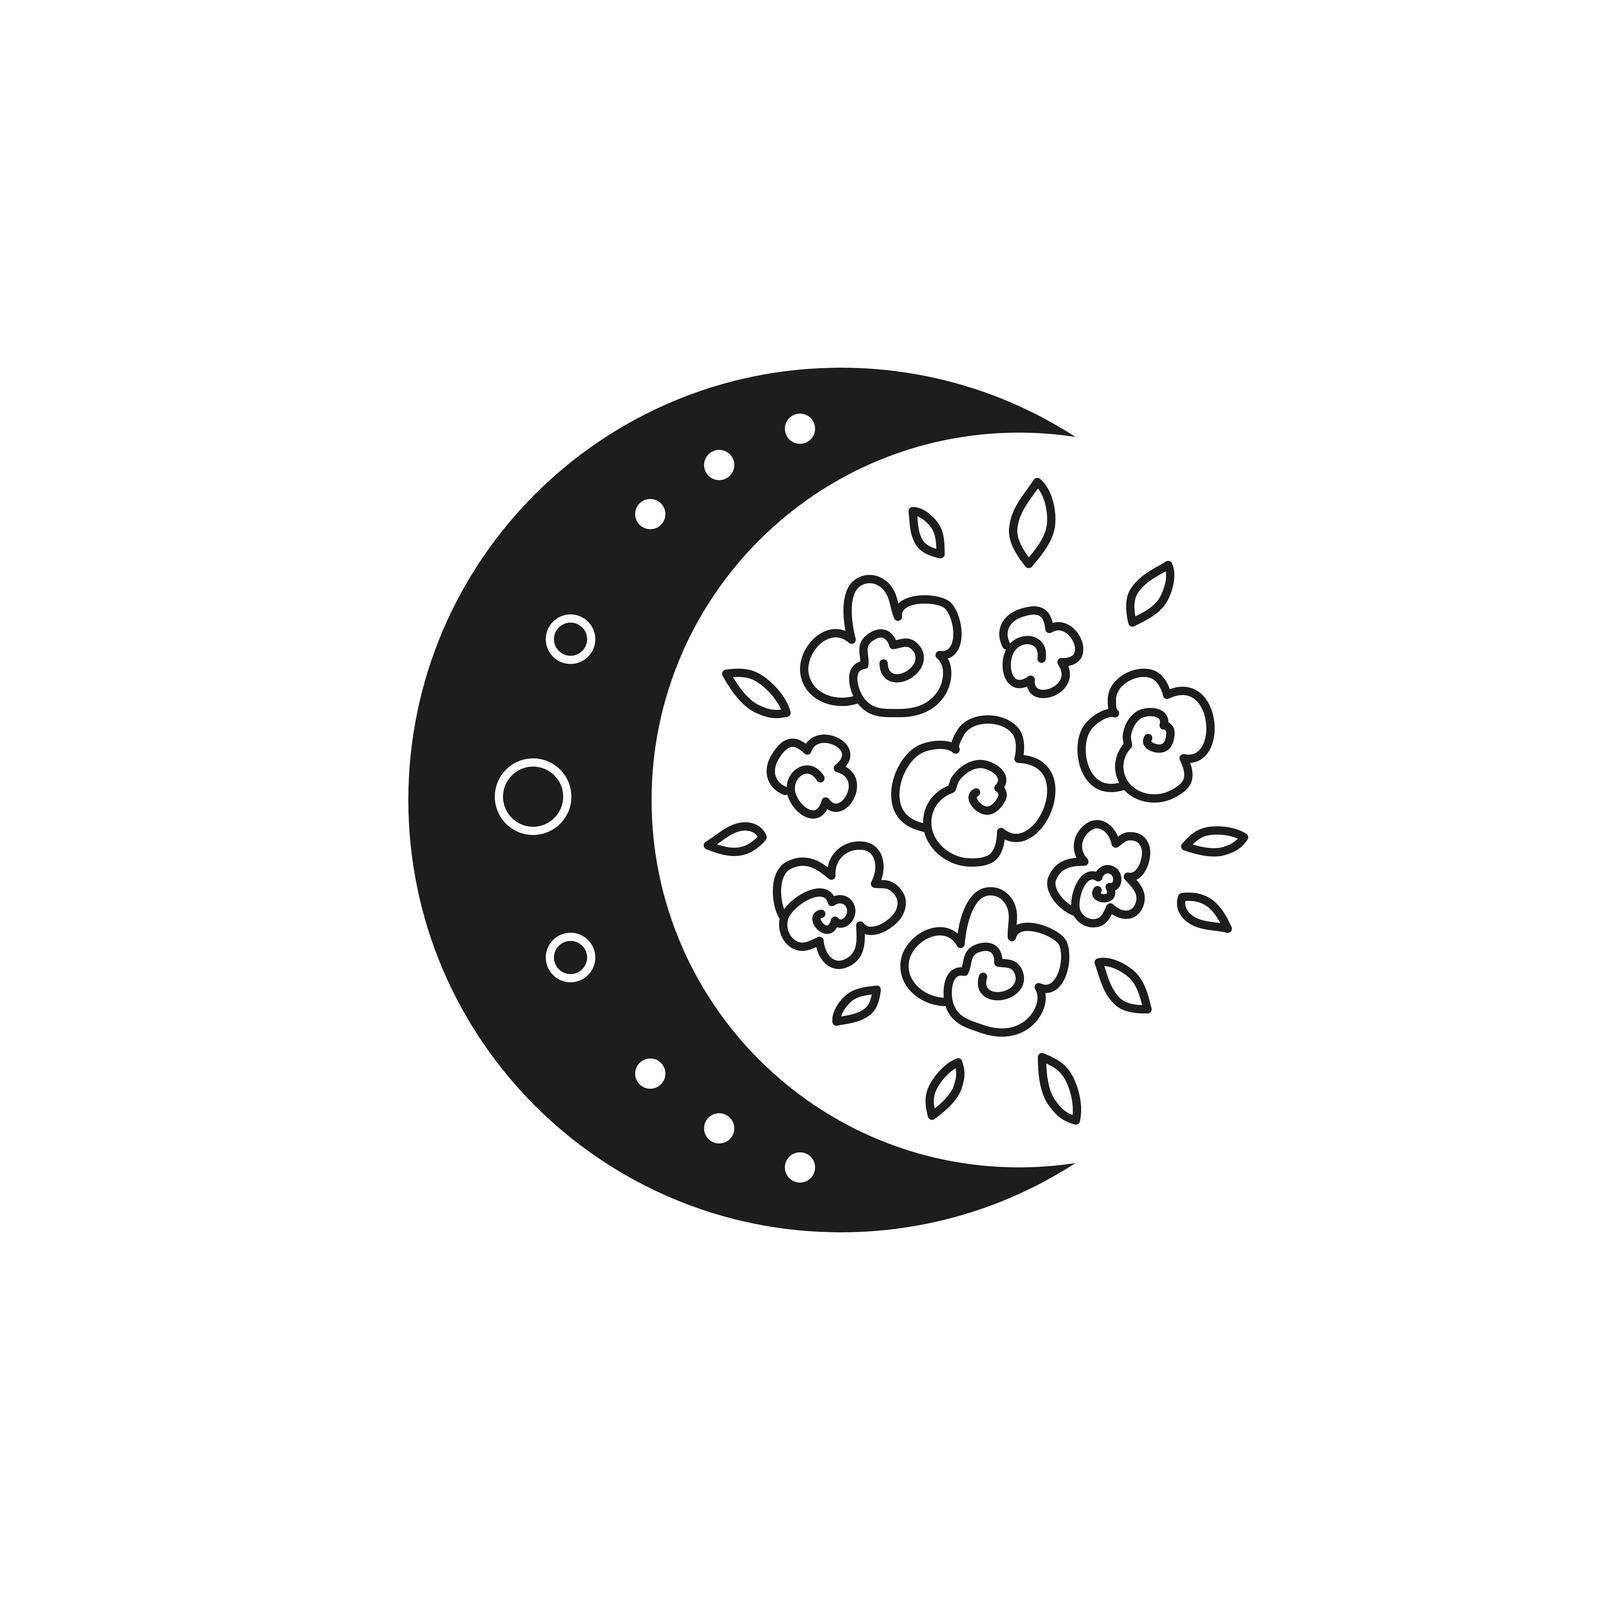 Black bohemian crescent moon with outline flowers isolated on white background. Mystic witchy illustration. Boho chic silhouette.